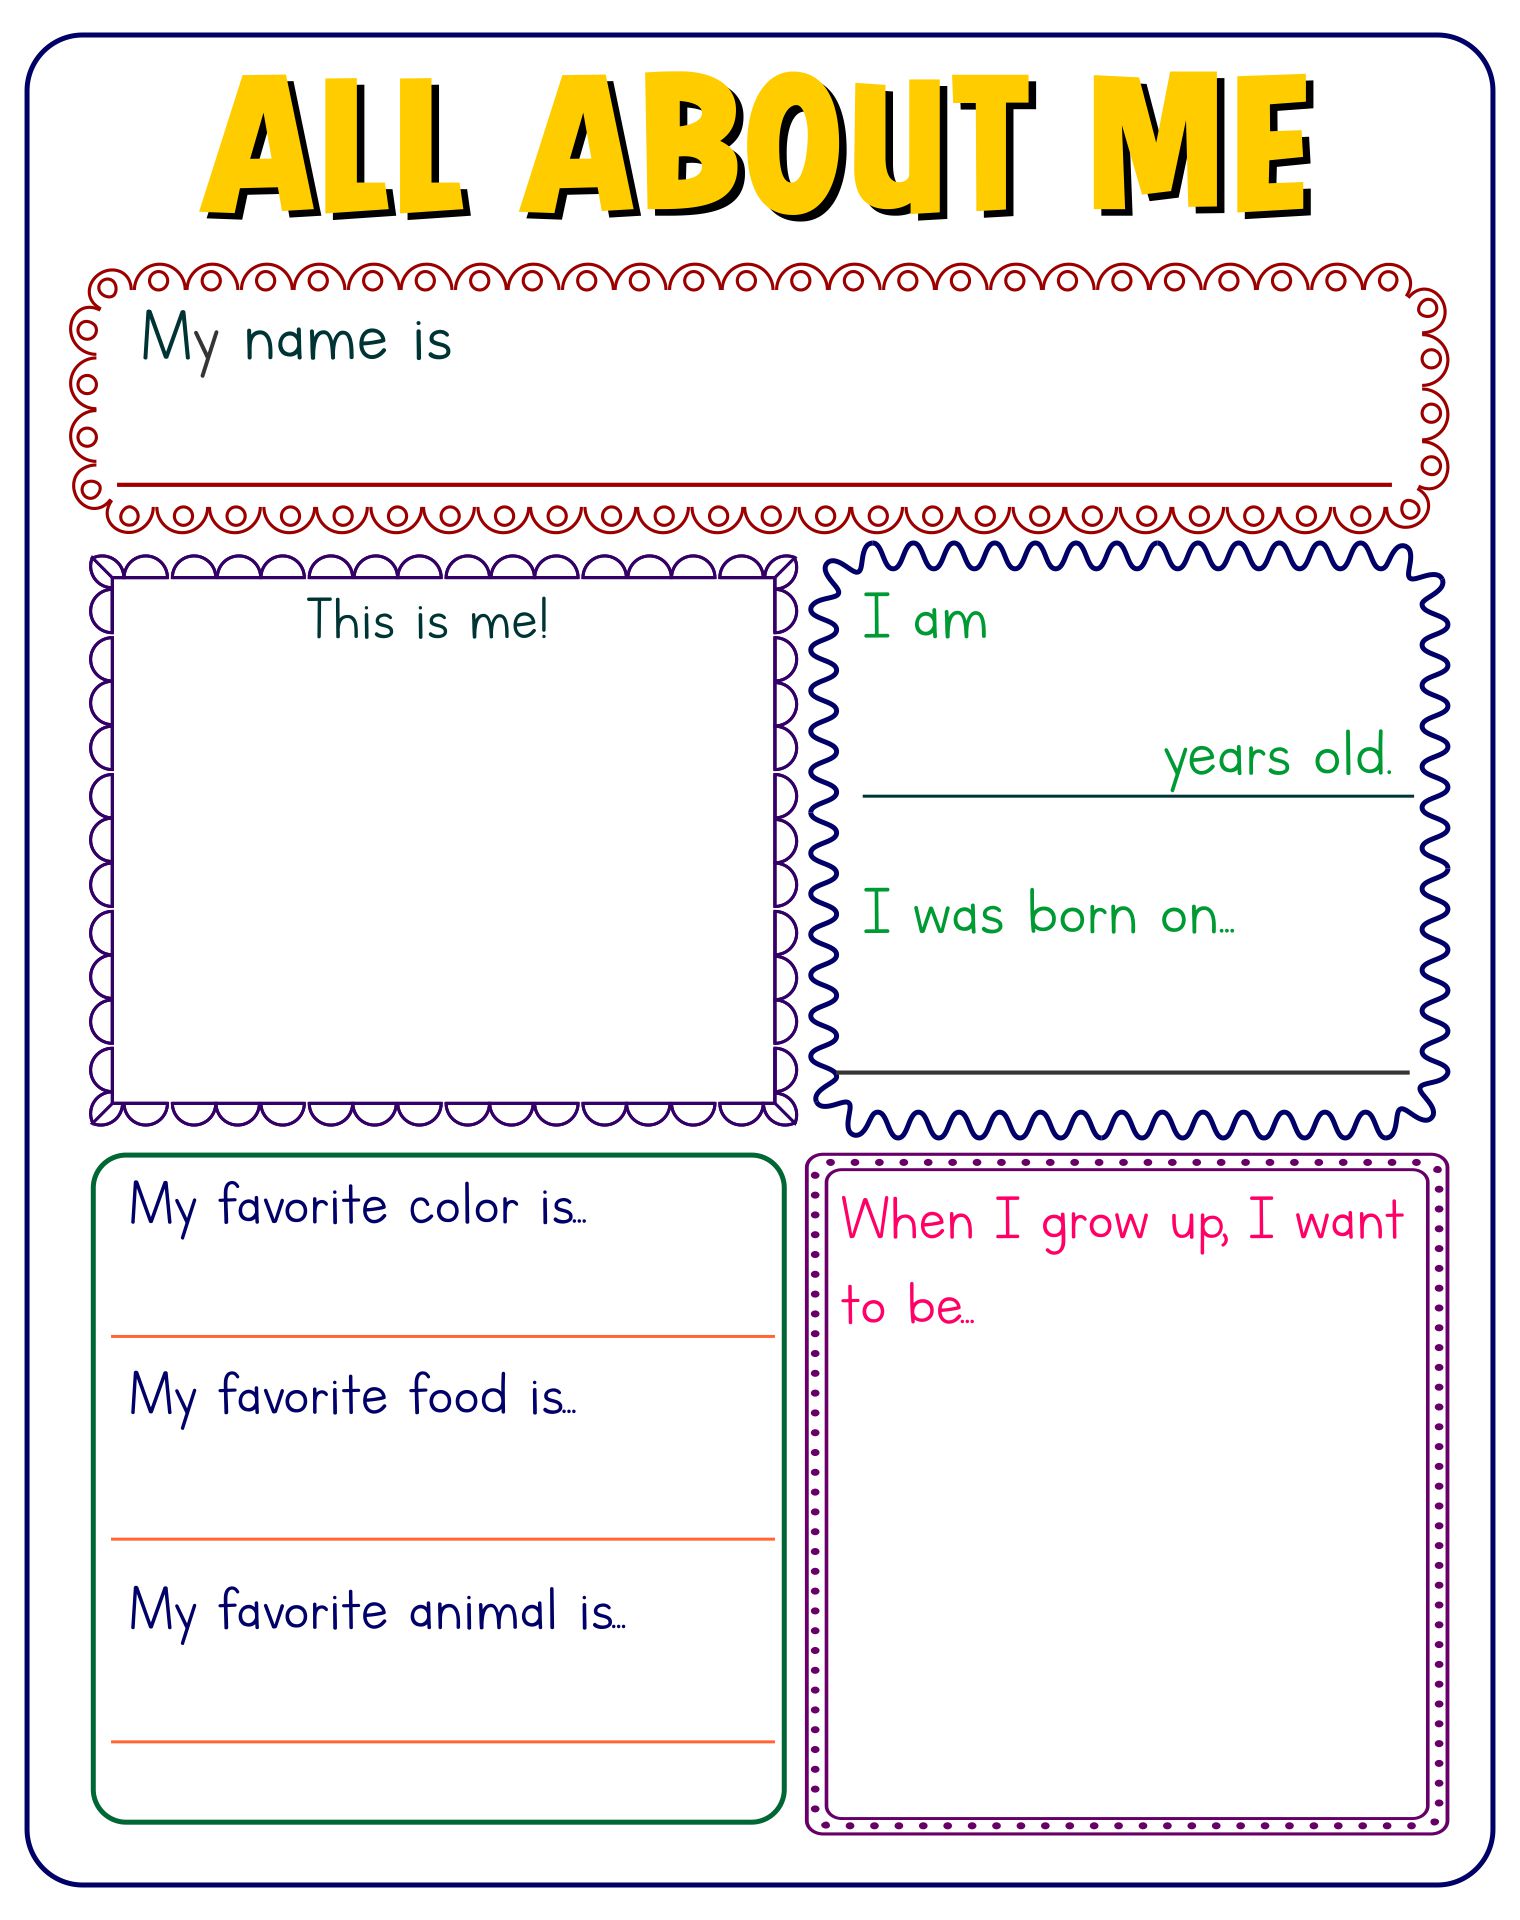 About Me Free Printable